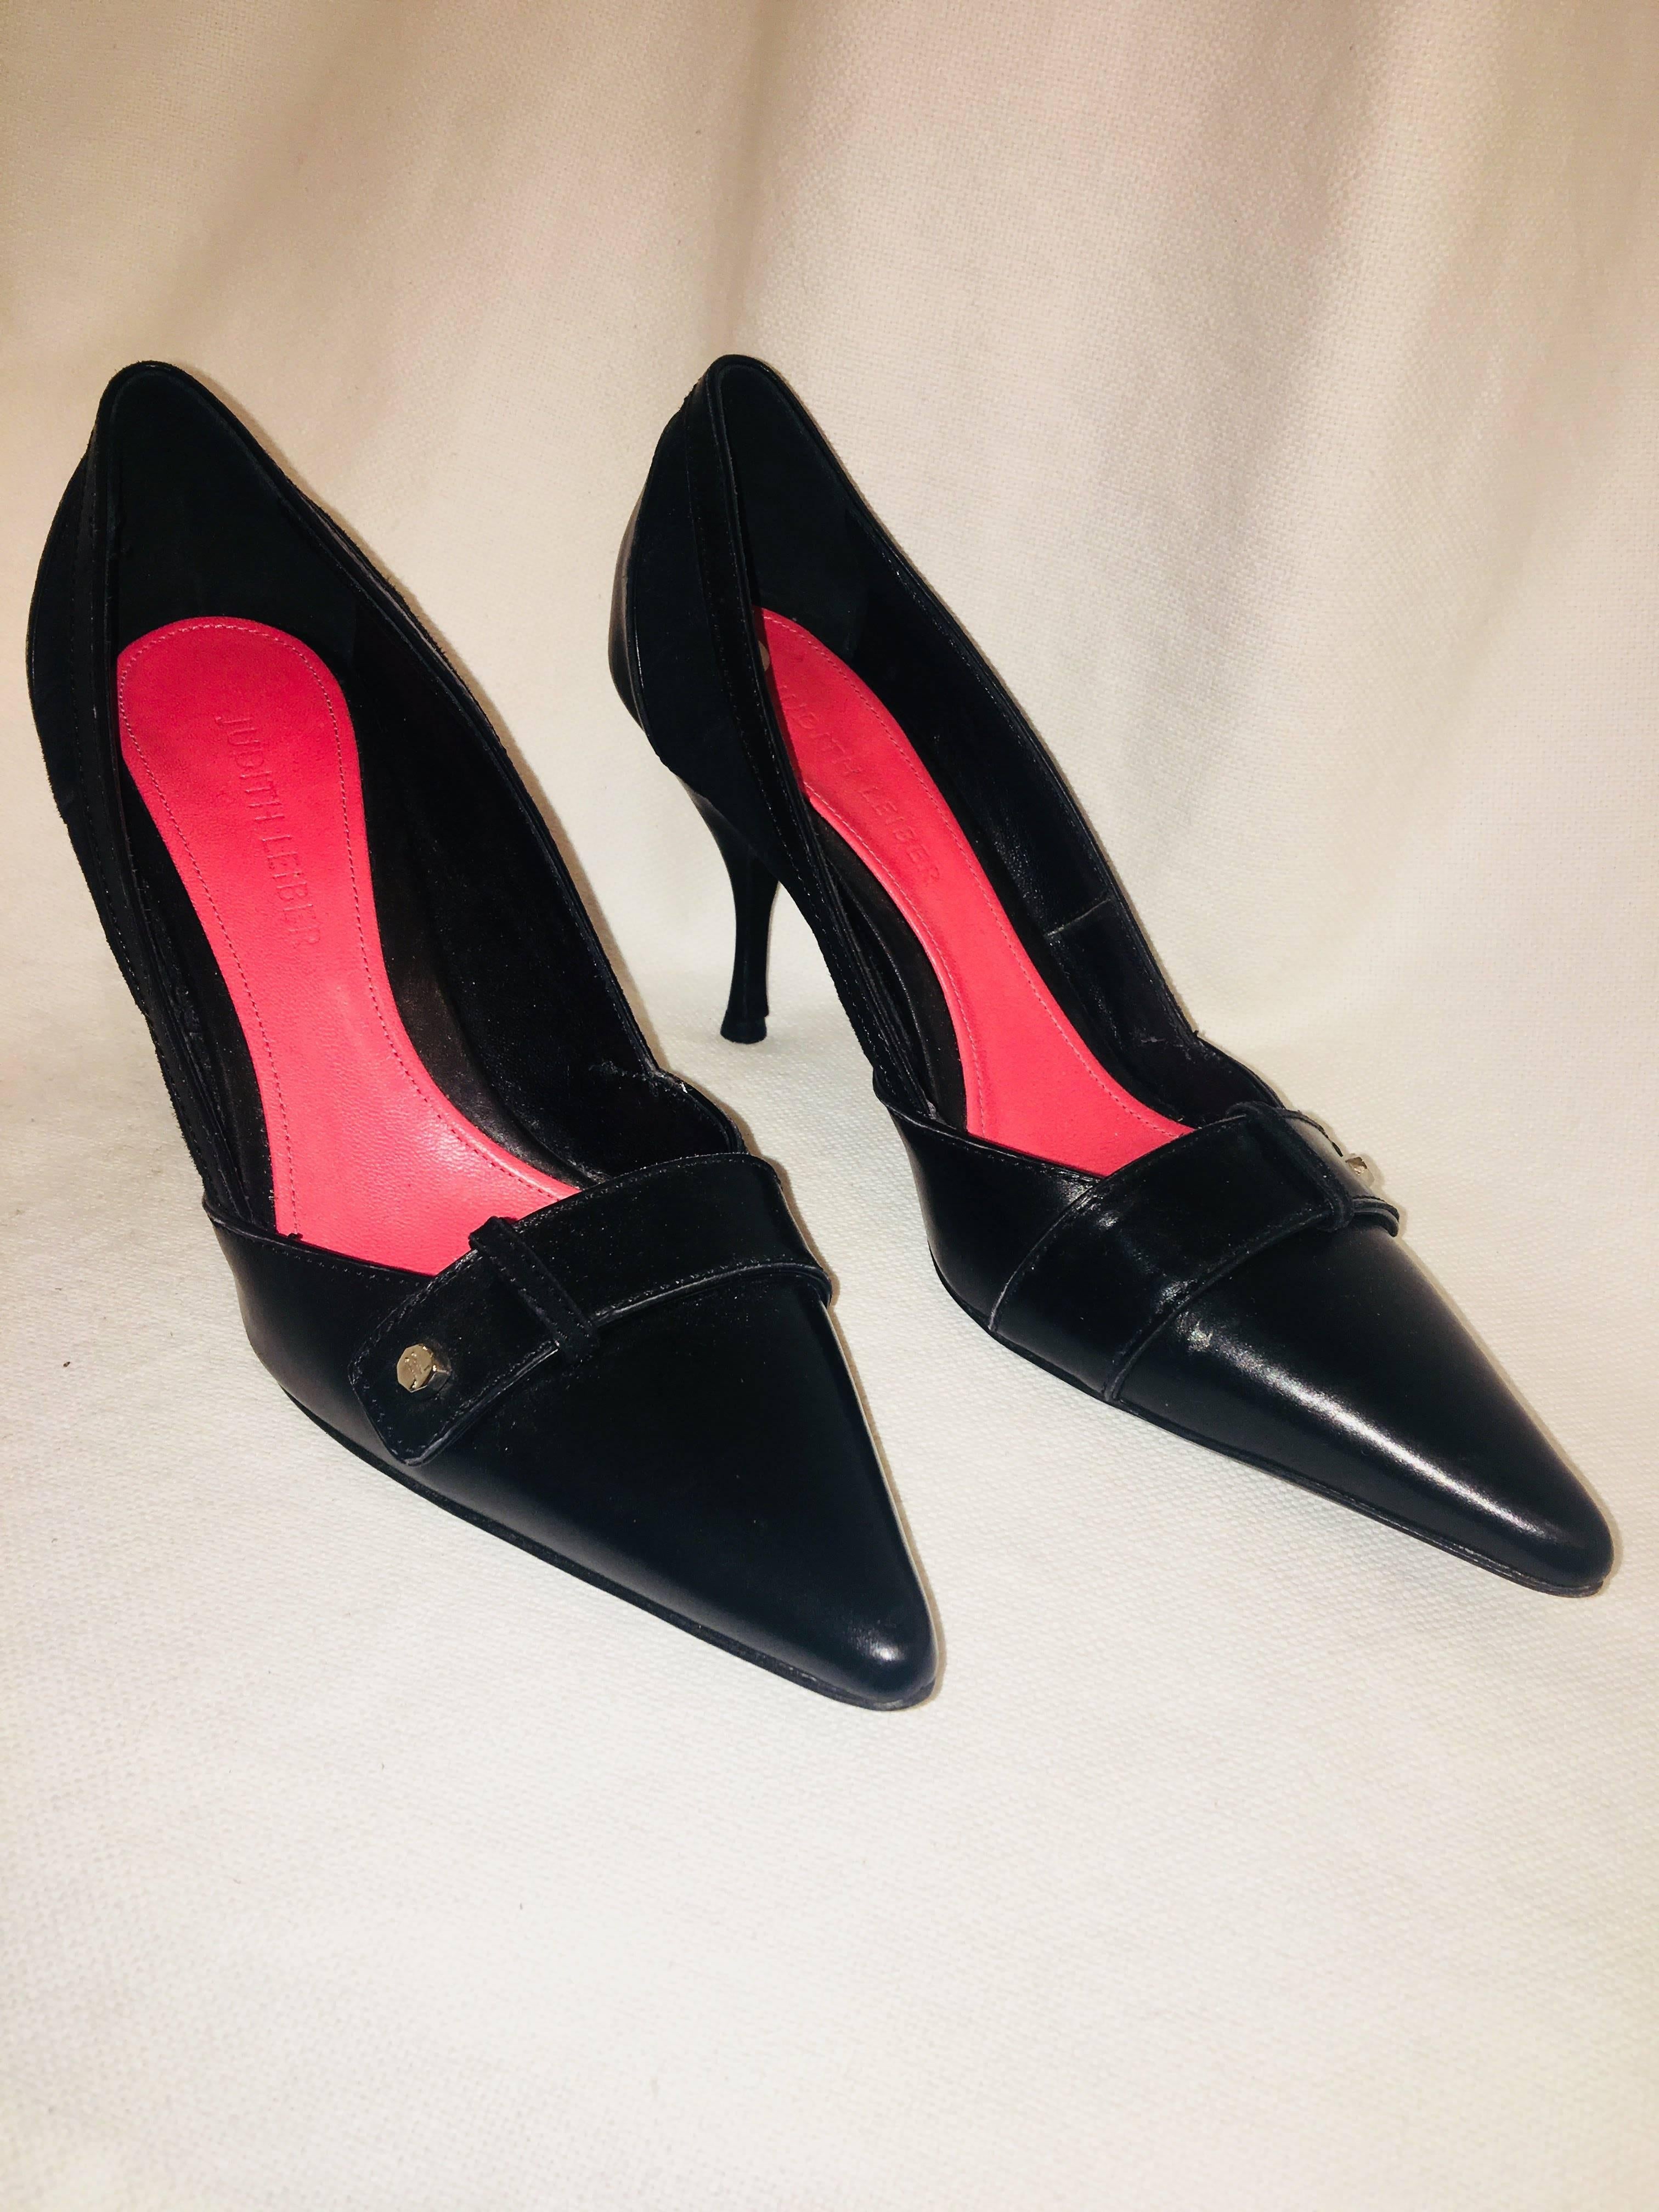 Judith Leiber Black Leather Pumps, Black Suede Detail, and Red Sole.